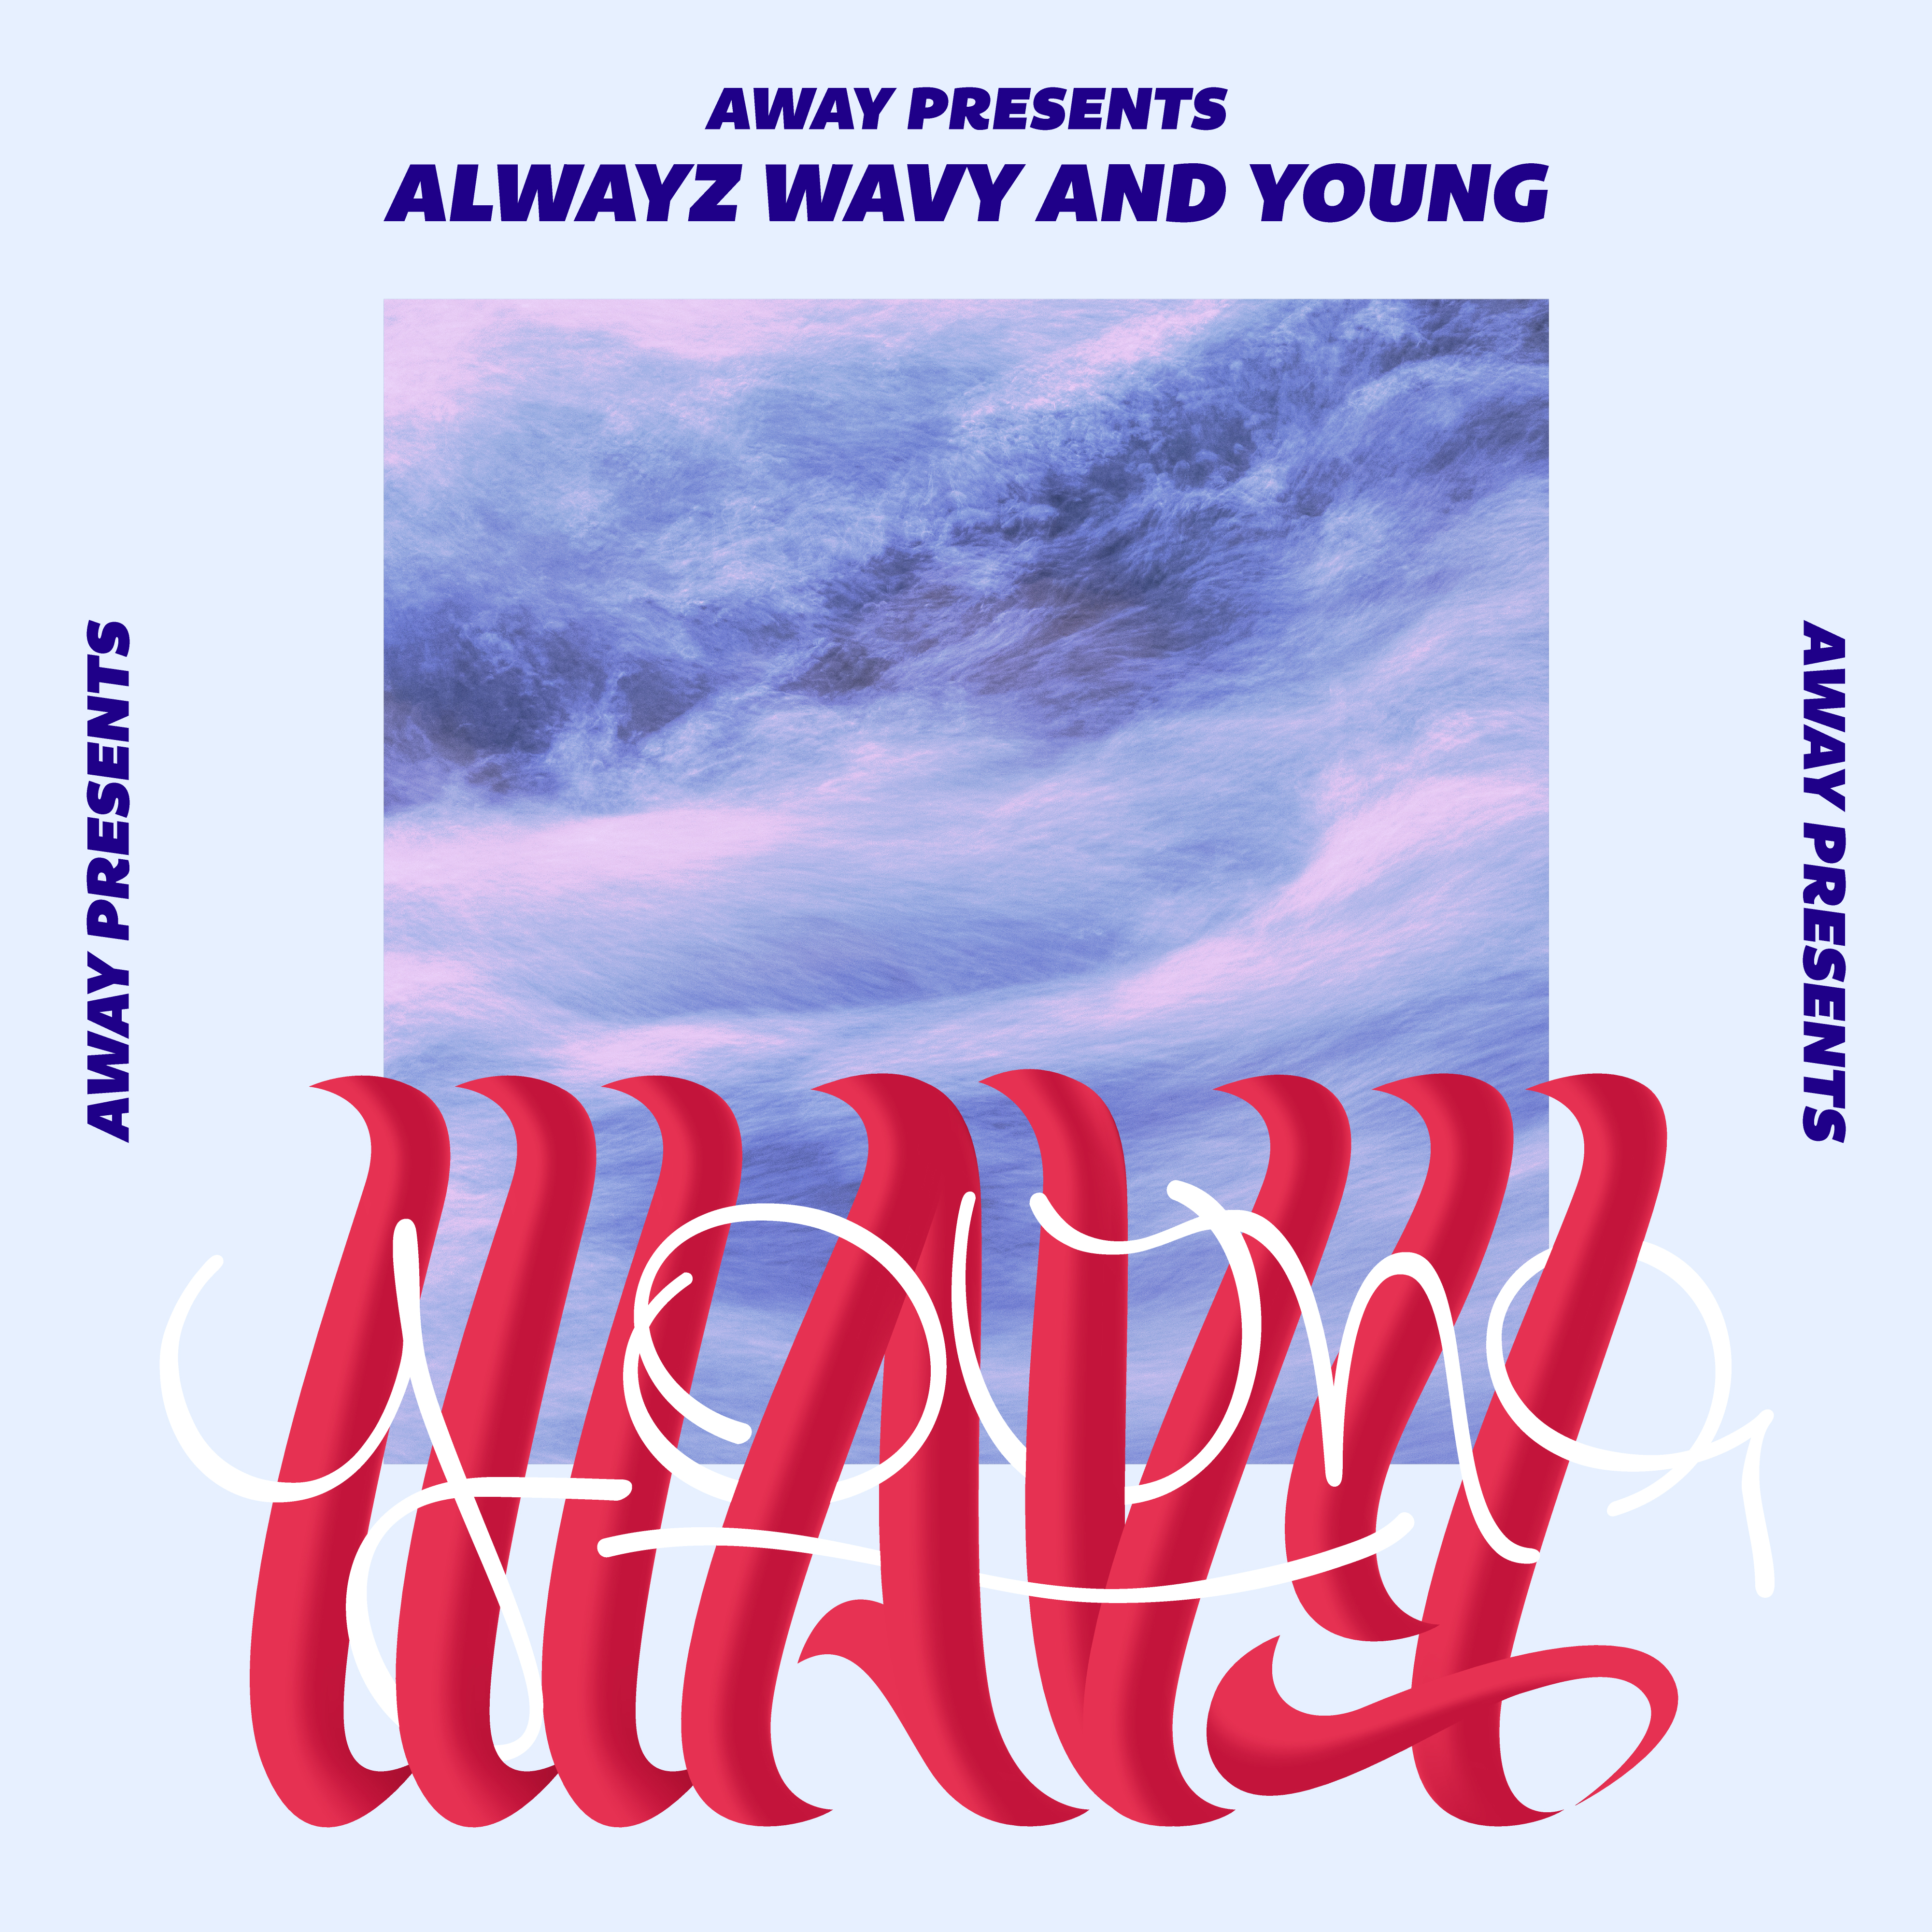 Alwayz Wavy And Young